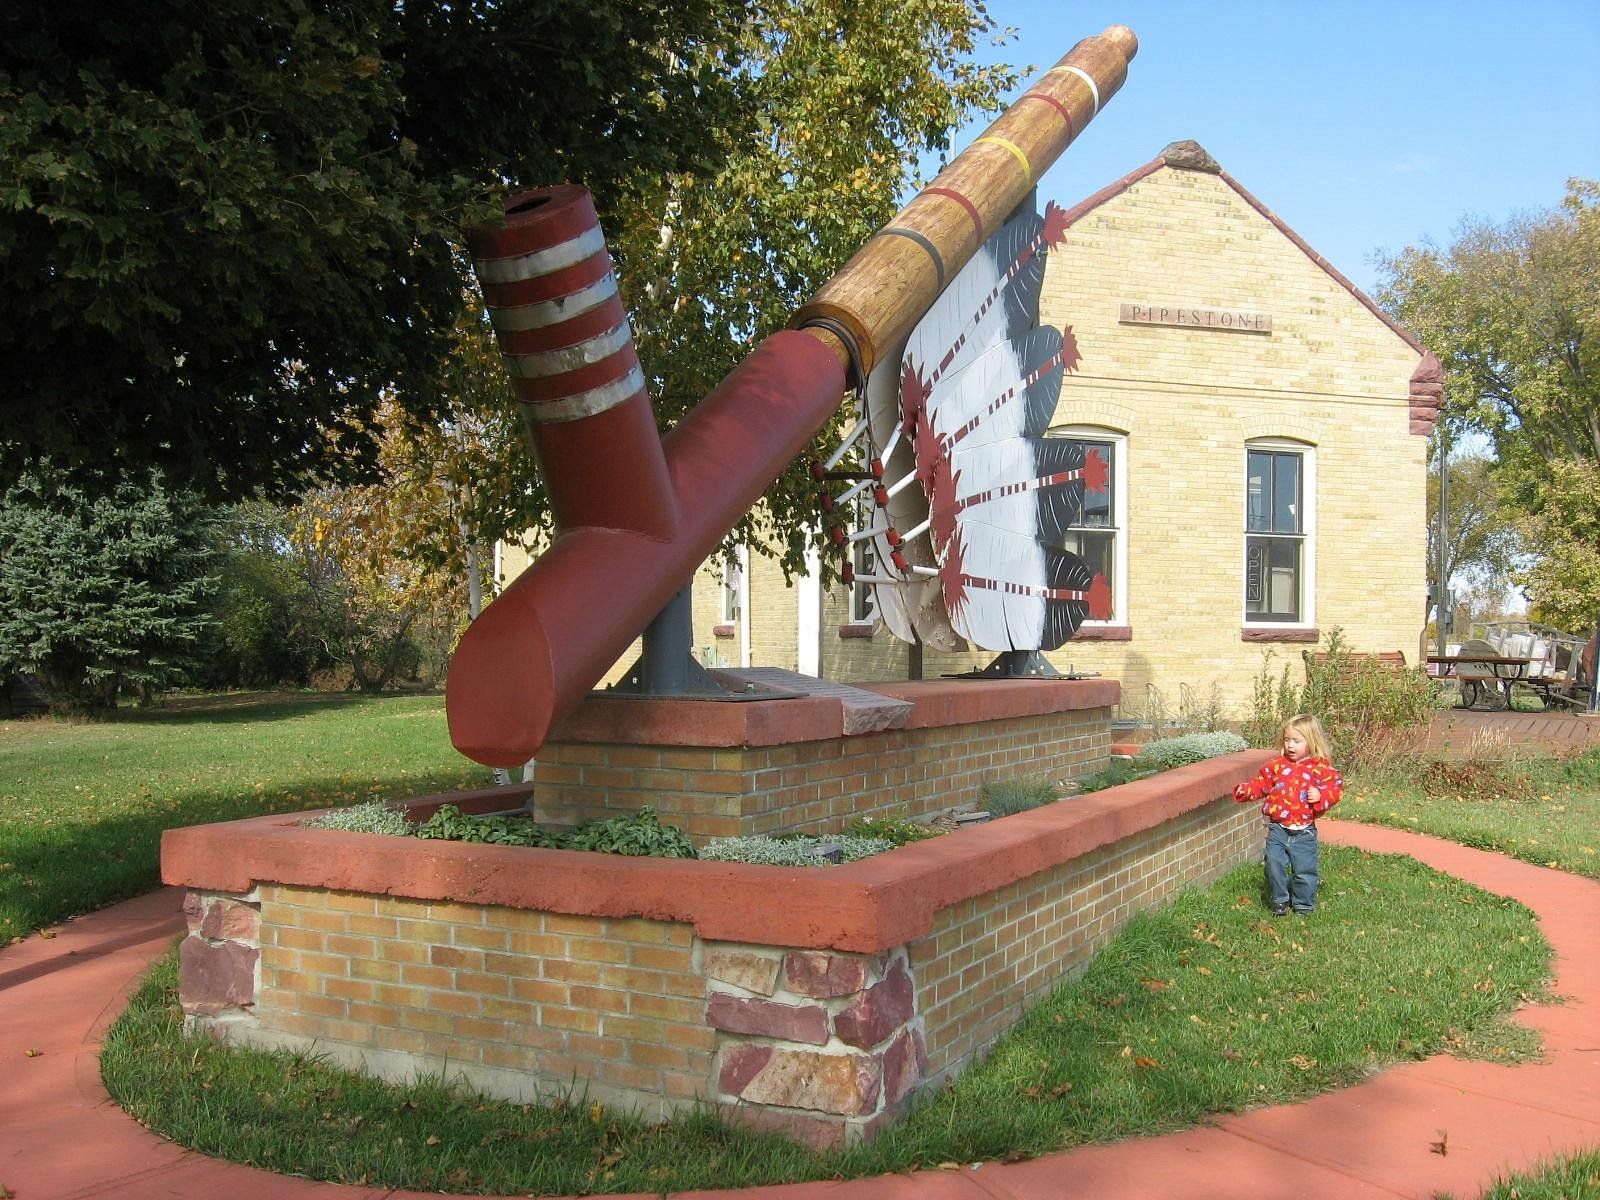 World's Largest Peace Pipe, world record in Pipestone, Minnesota